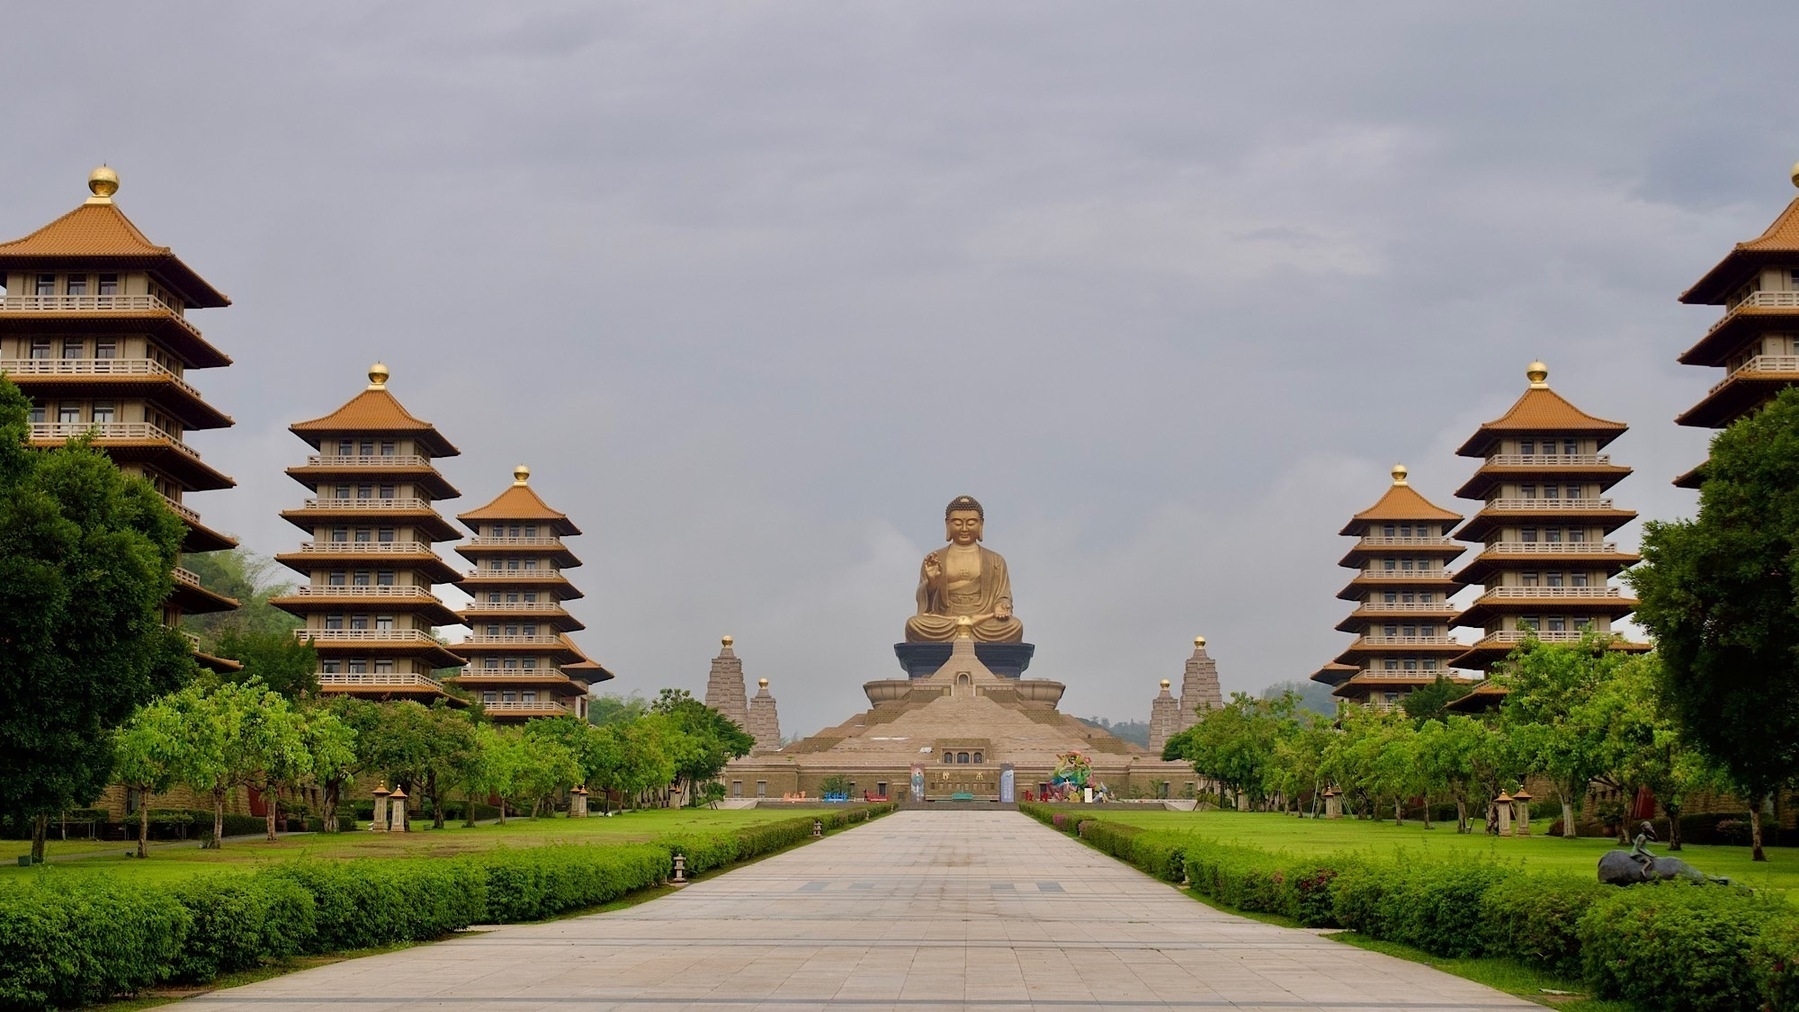 a wide boulevard lined with trees and pagodas leading to a huge Buddha statue